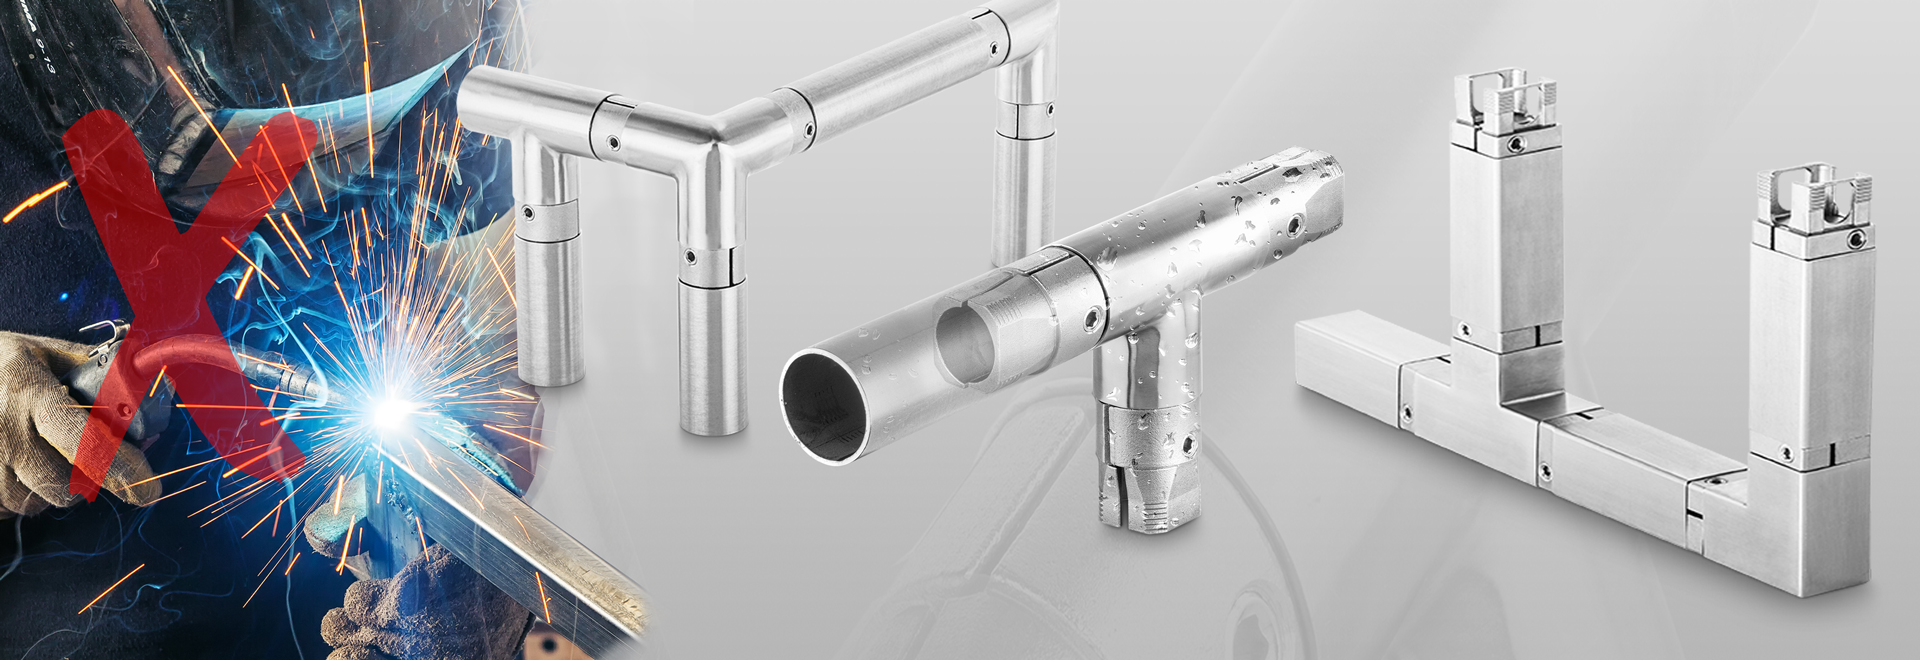 Stainless steel Connecting system without welding. Easy assembly with just one tool.